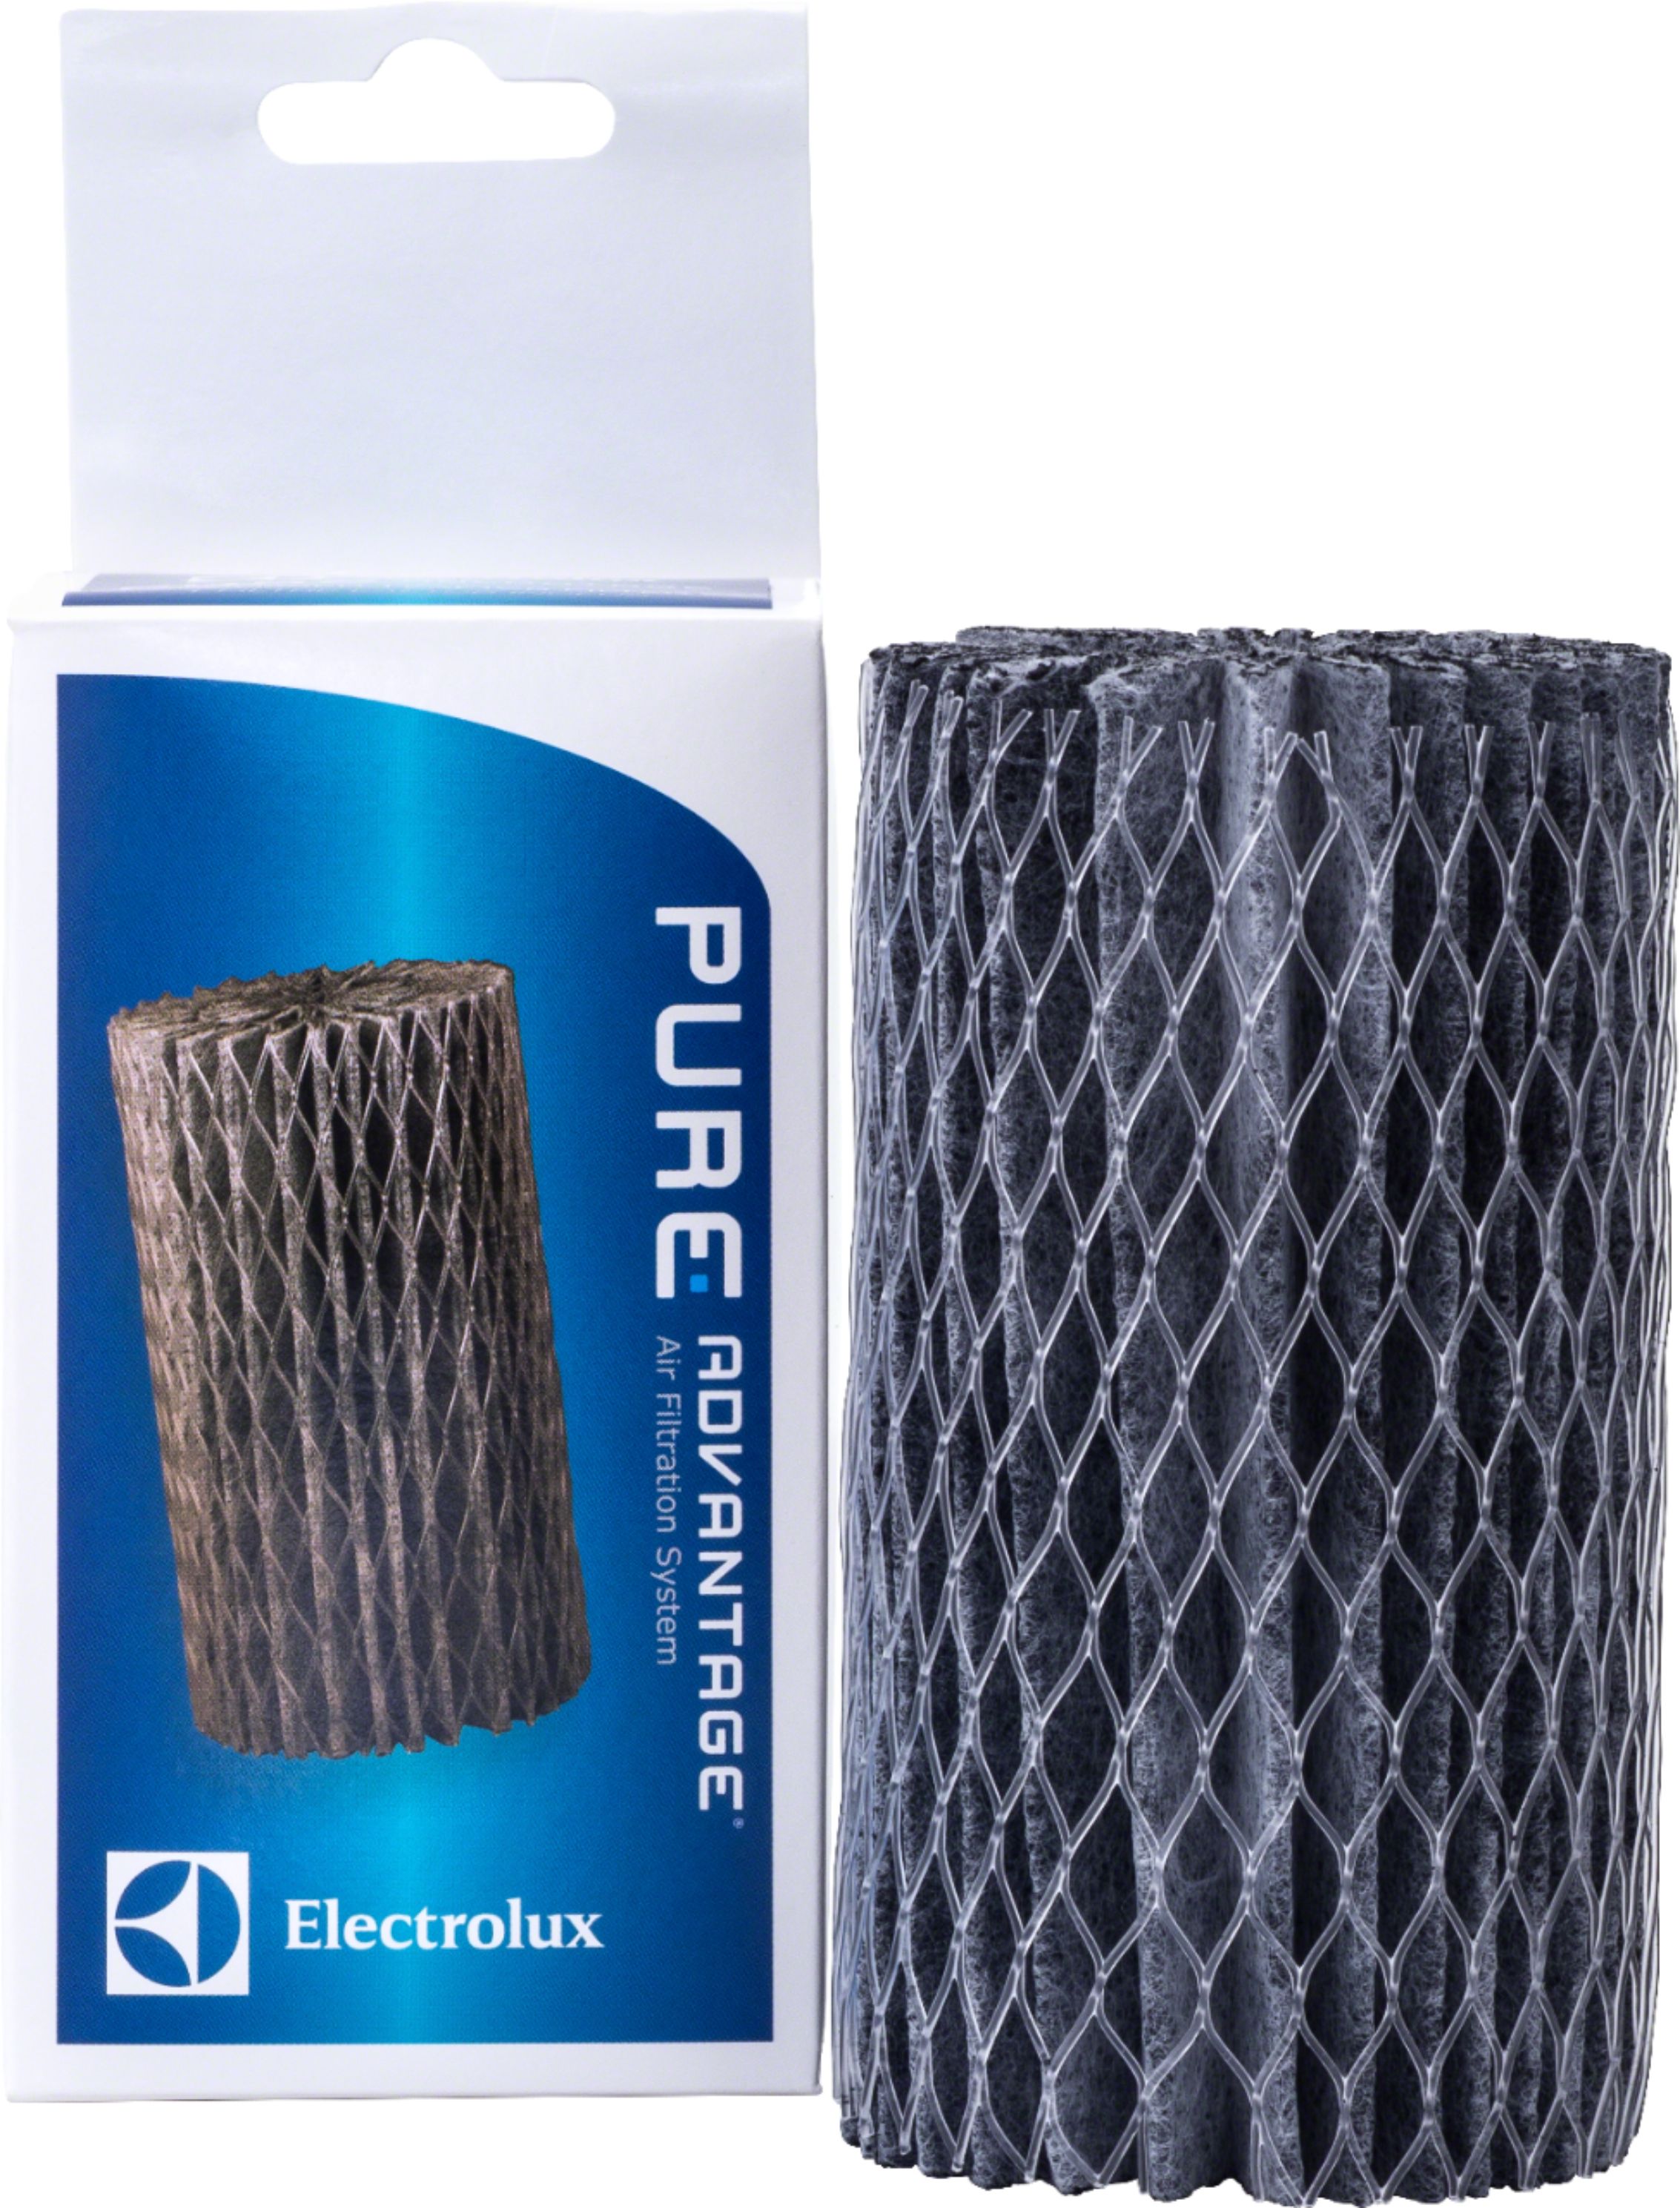 Left View: Electrolux - Air Filter for Refrigerators and Freezers - Gray